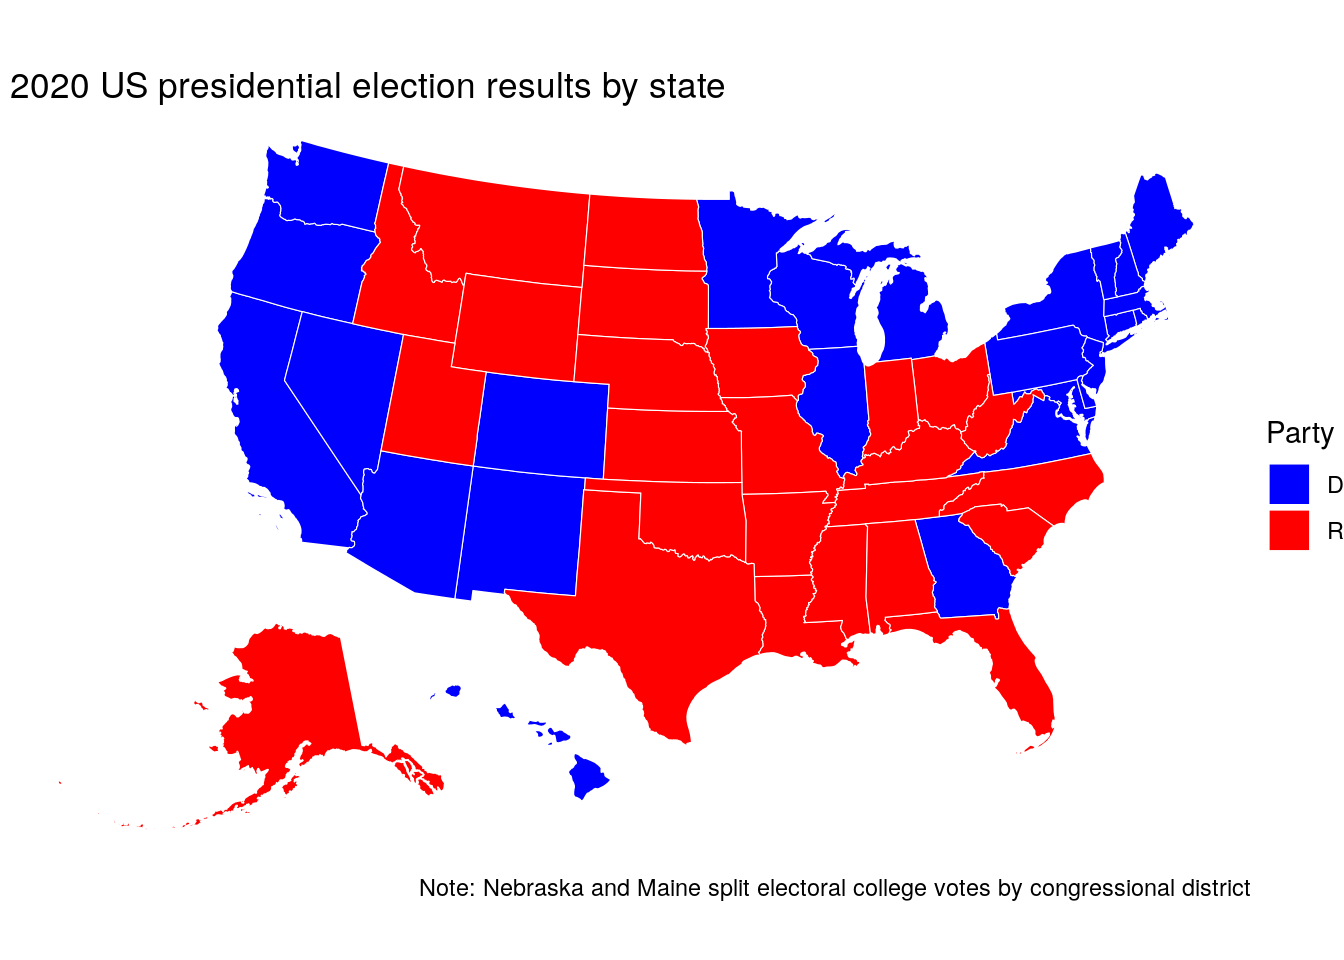 Map of the 2020 US presidential election results with ggplot2